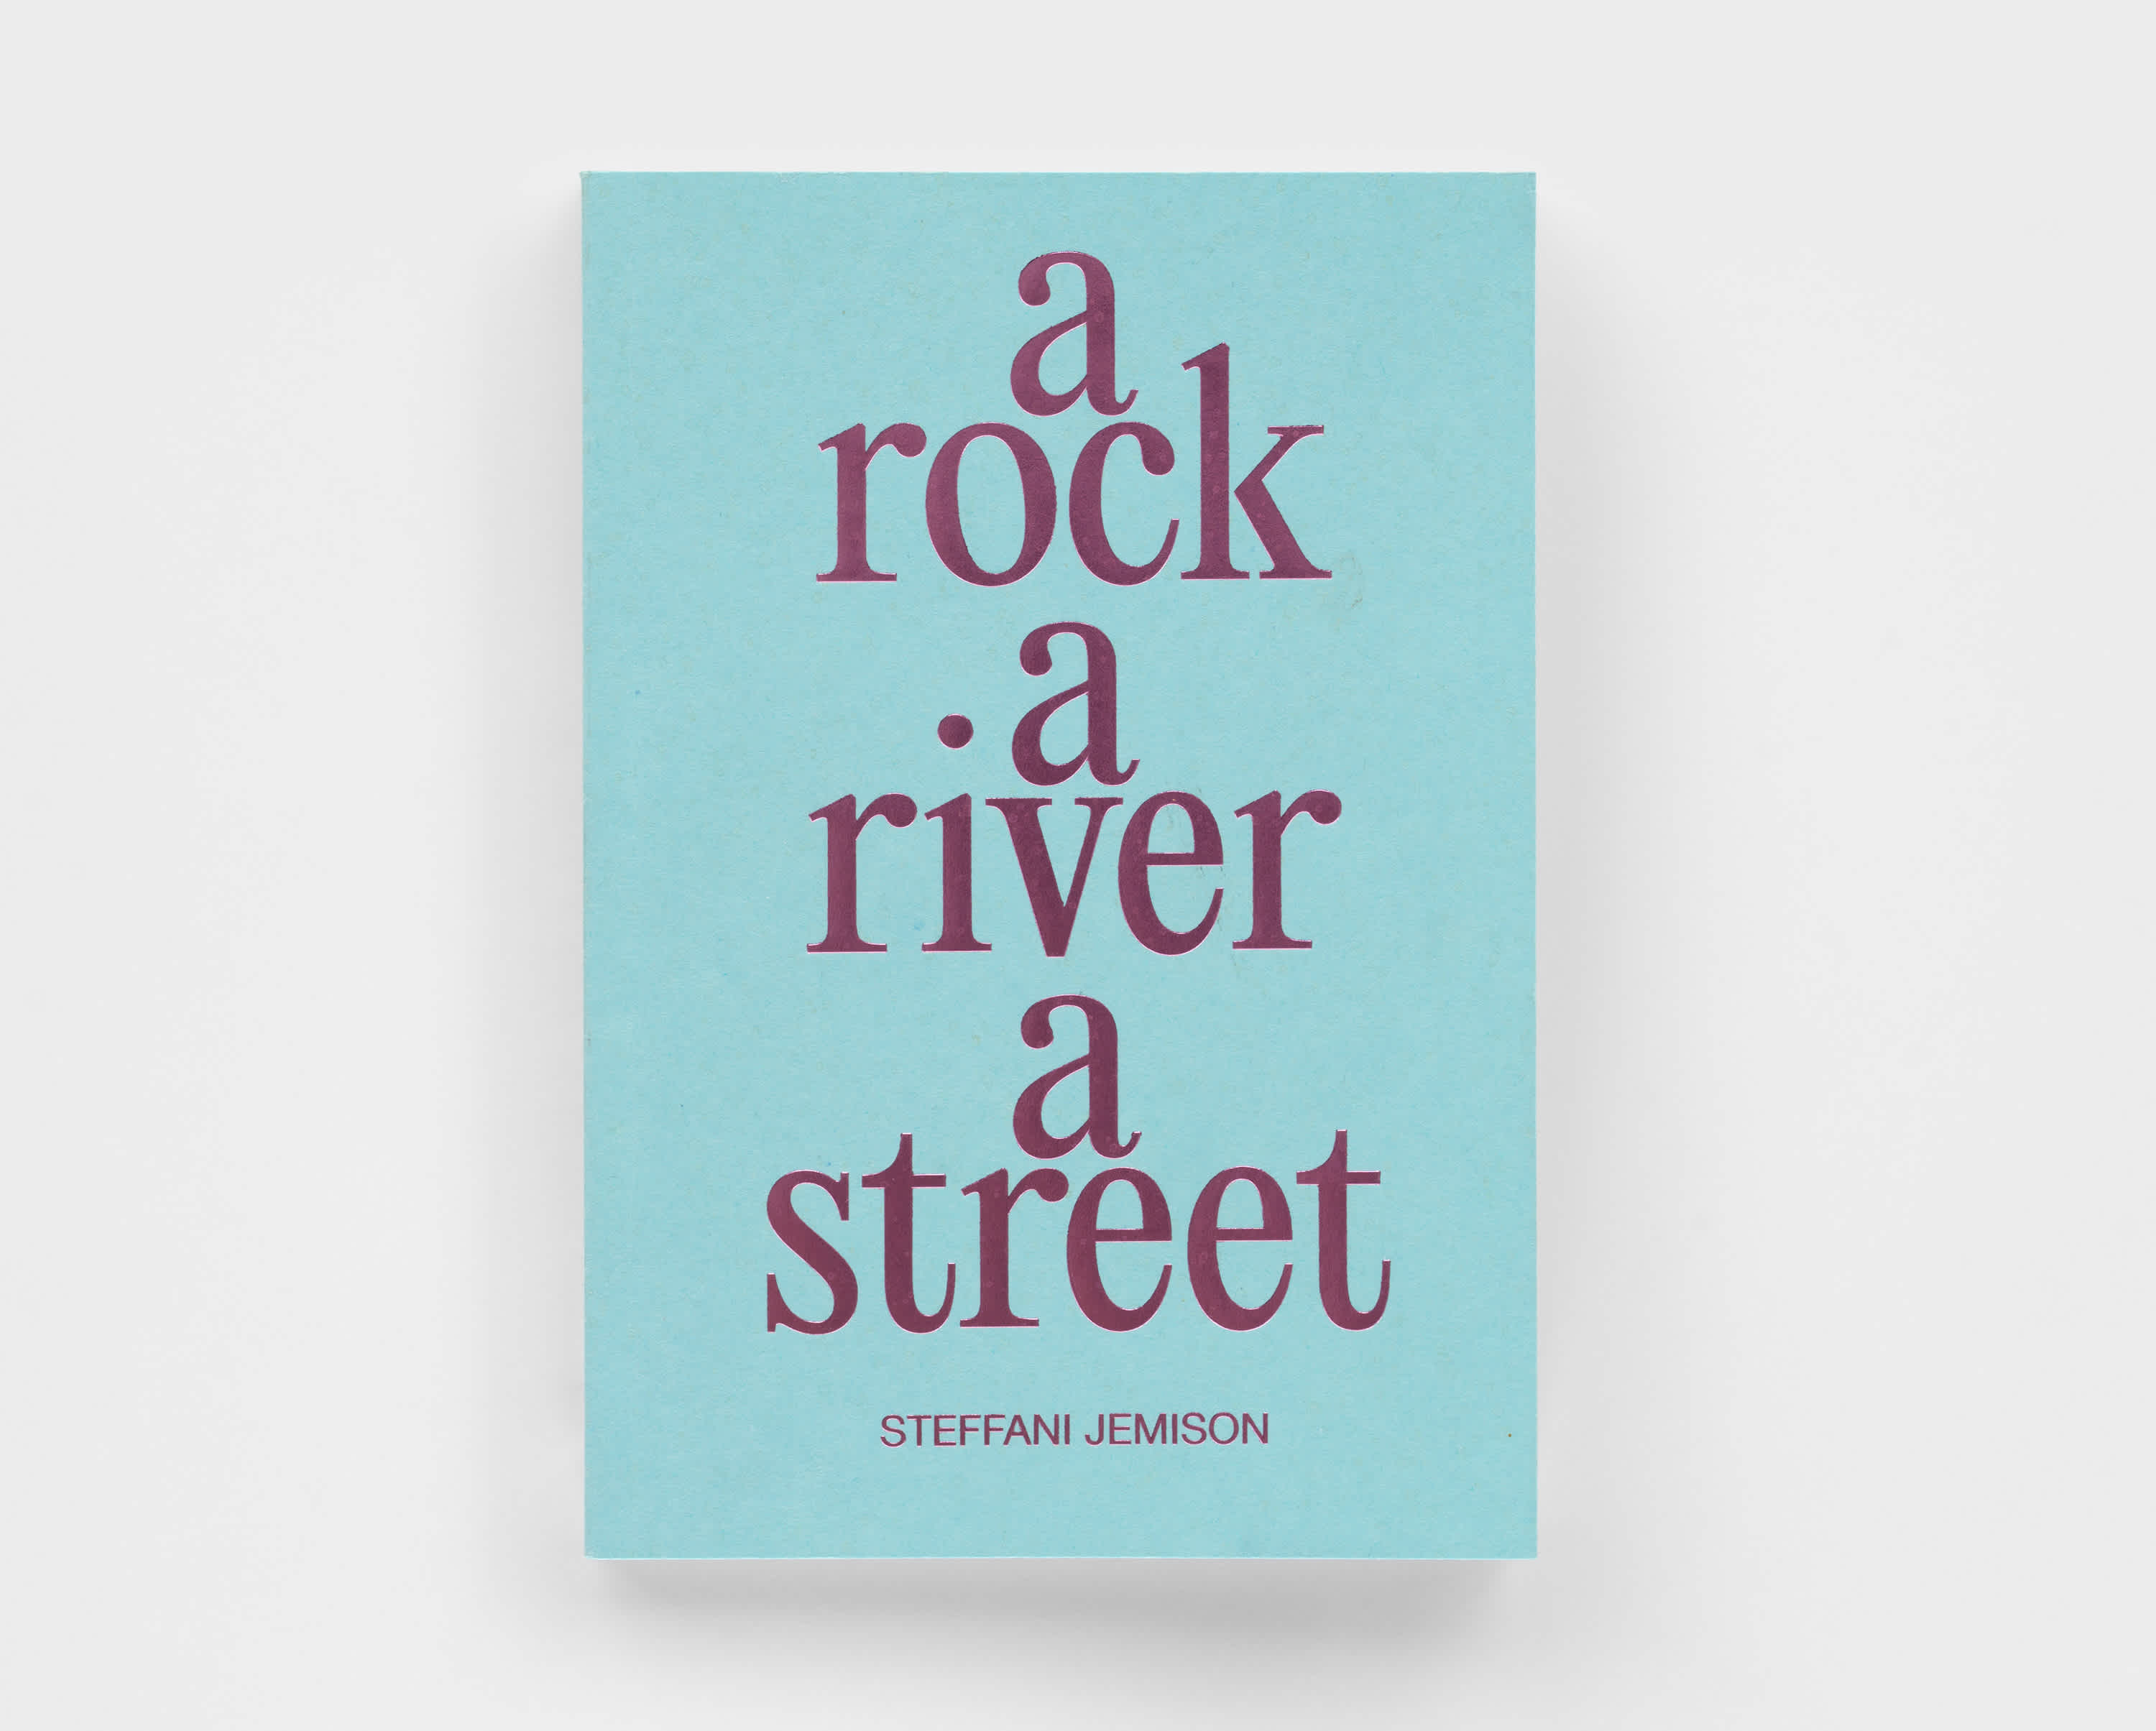 Light blue book cover, with a metallic purple title that reads "a rock, a river, a street" in lowercase. Each word is stacked on top of the other. The author's name, Steffani Jemison, sits below the title in all capital letters.